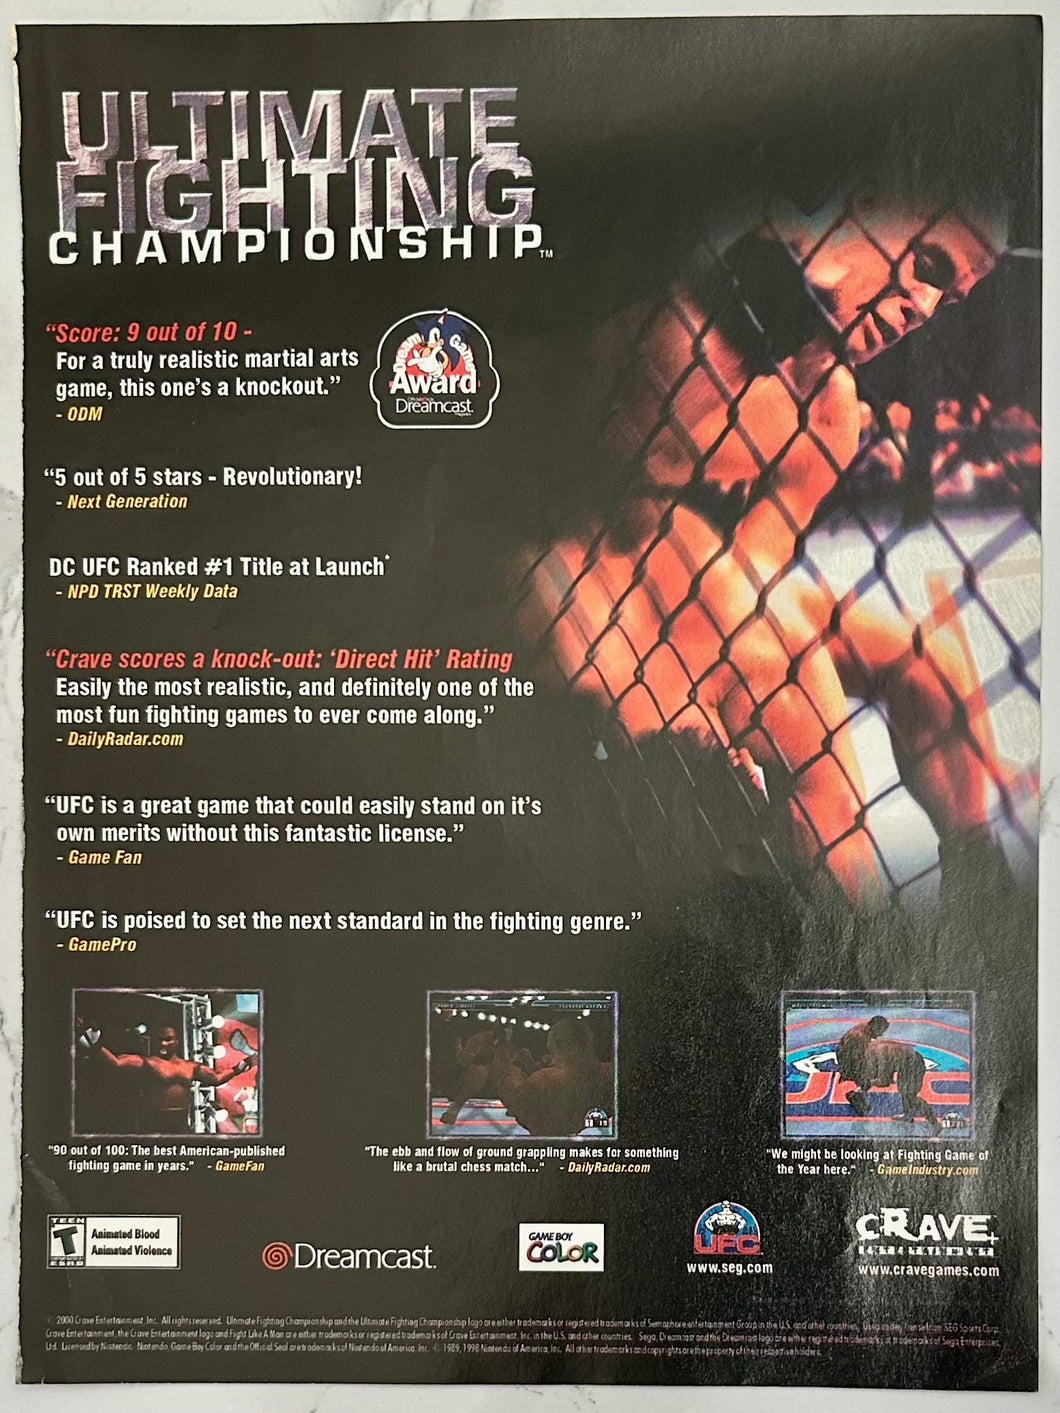 Ultimate Fighting Championship - Dreamcast GBC - Original Vintage Advertisement - Print Ads - Laminated A4 Poster